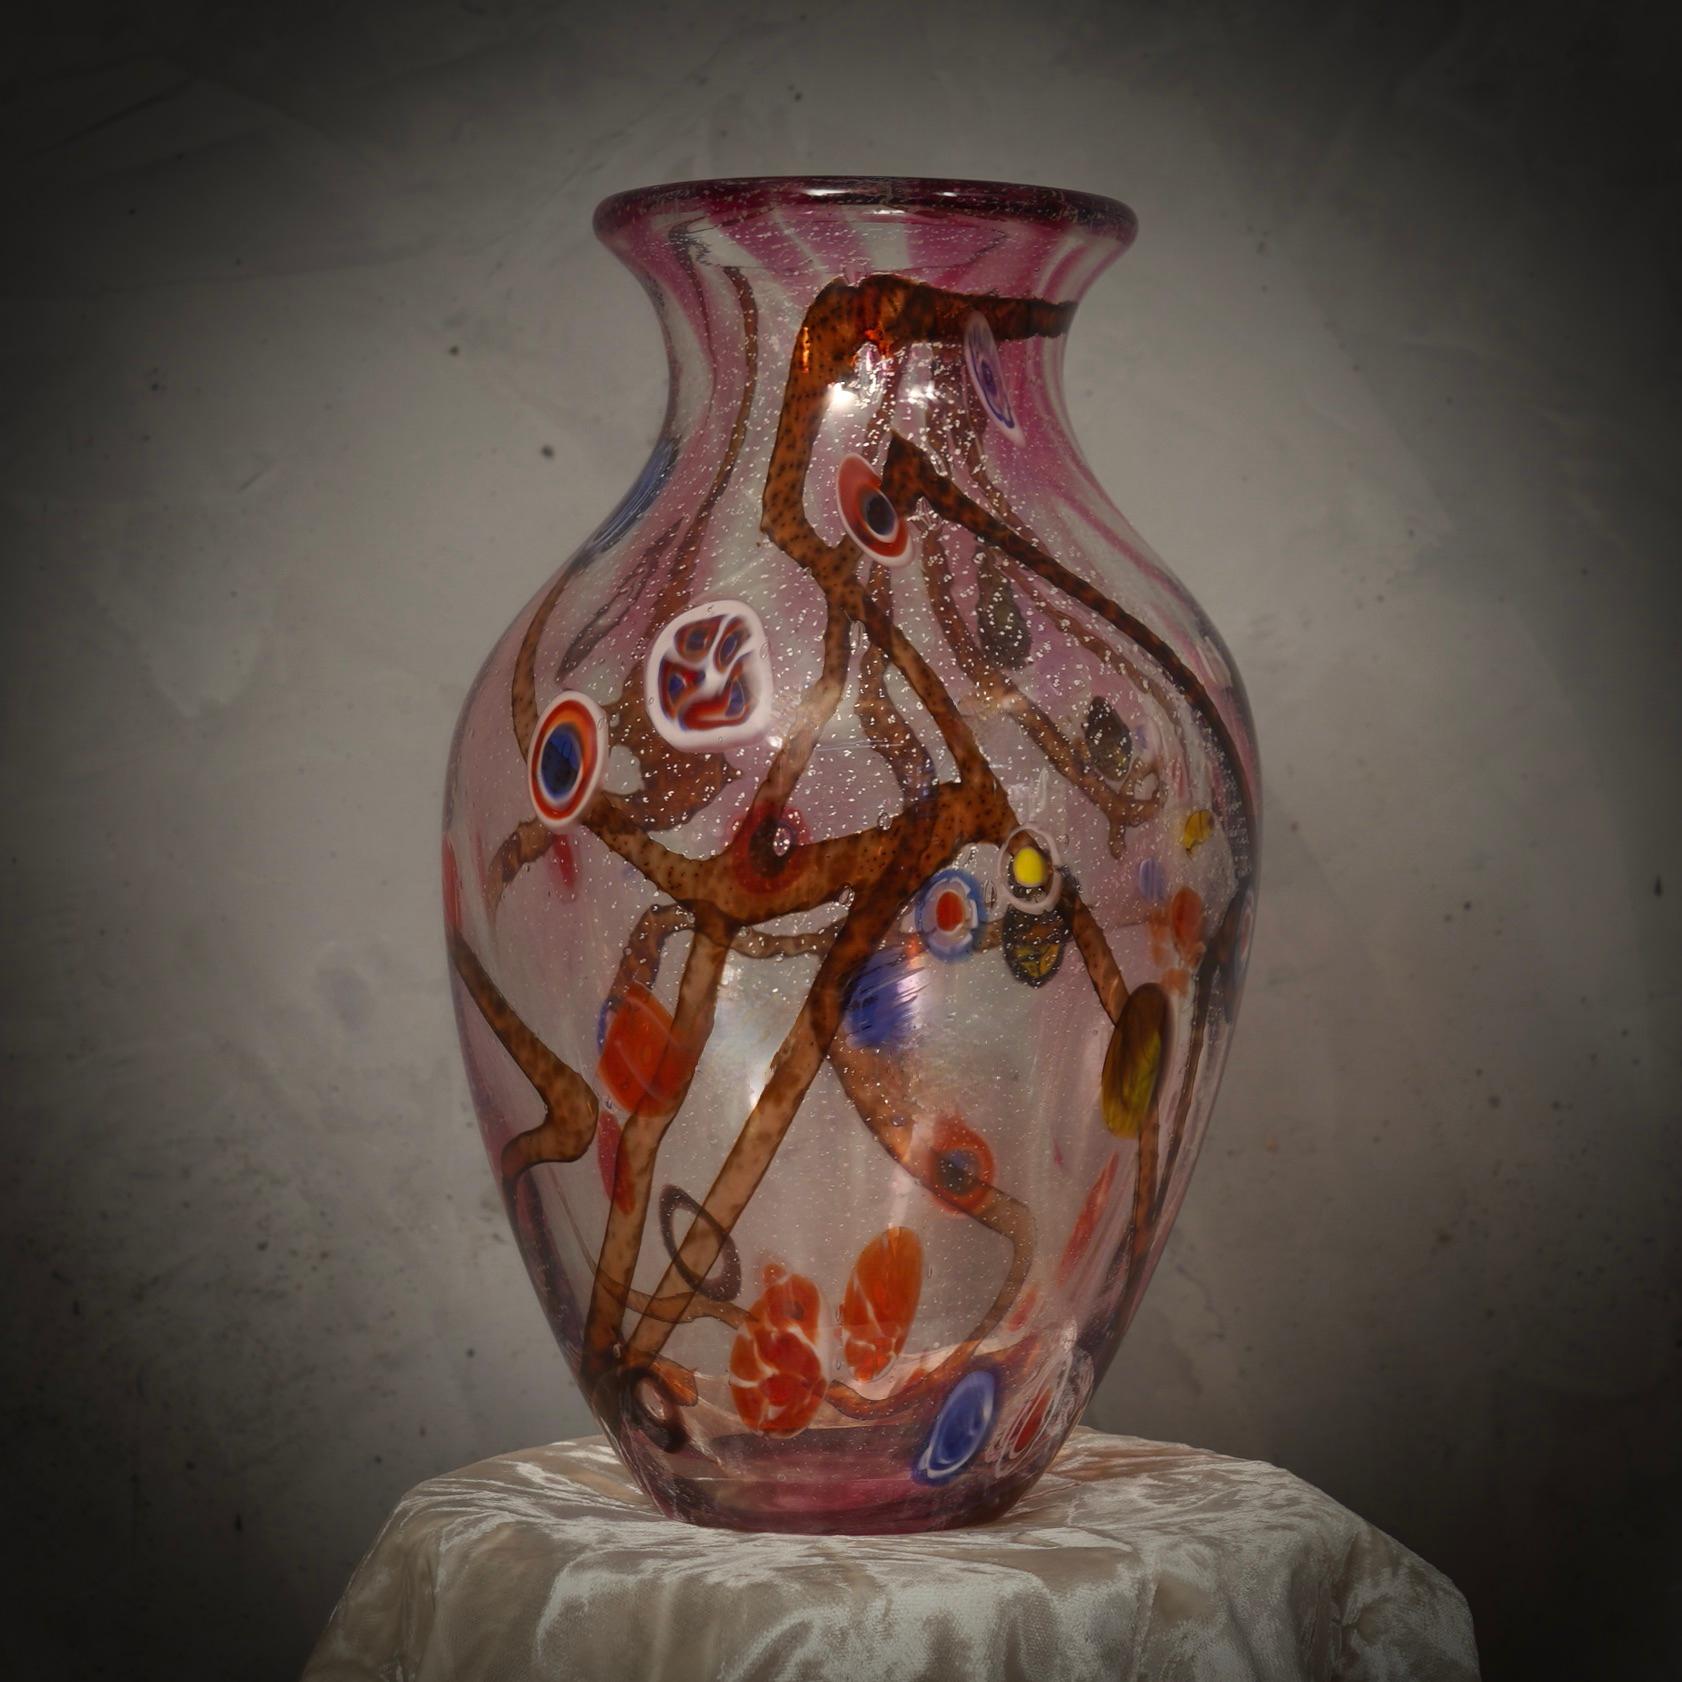 Fantastic vase from the Murano glassworks, both for its particular workmanship and for the color, in fact the vase is transparent pink in color with many murrine inside the glass.

Murano vase, with particular workmanship all around. Round section